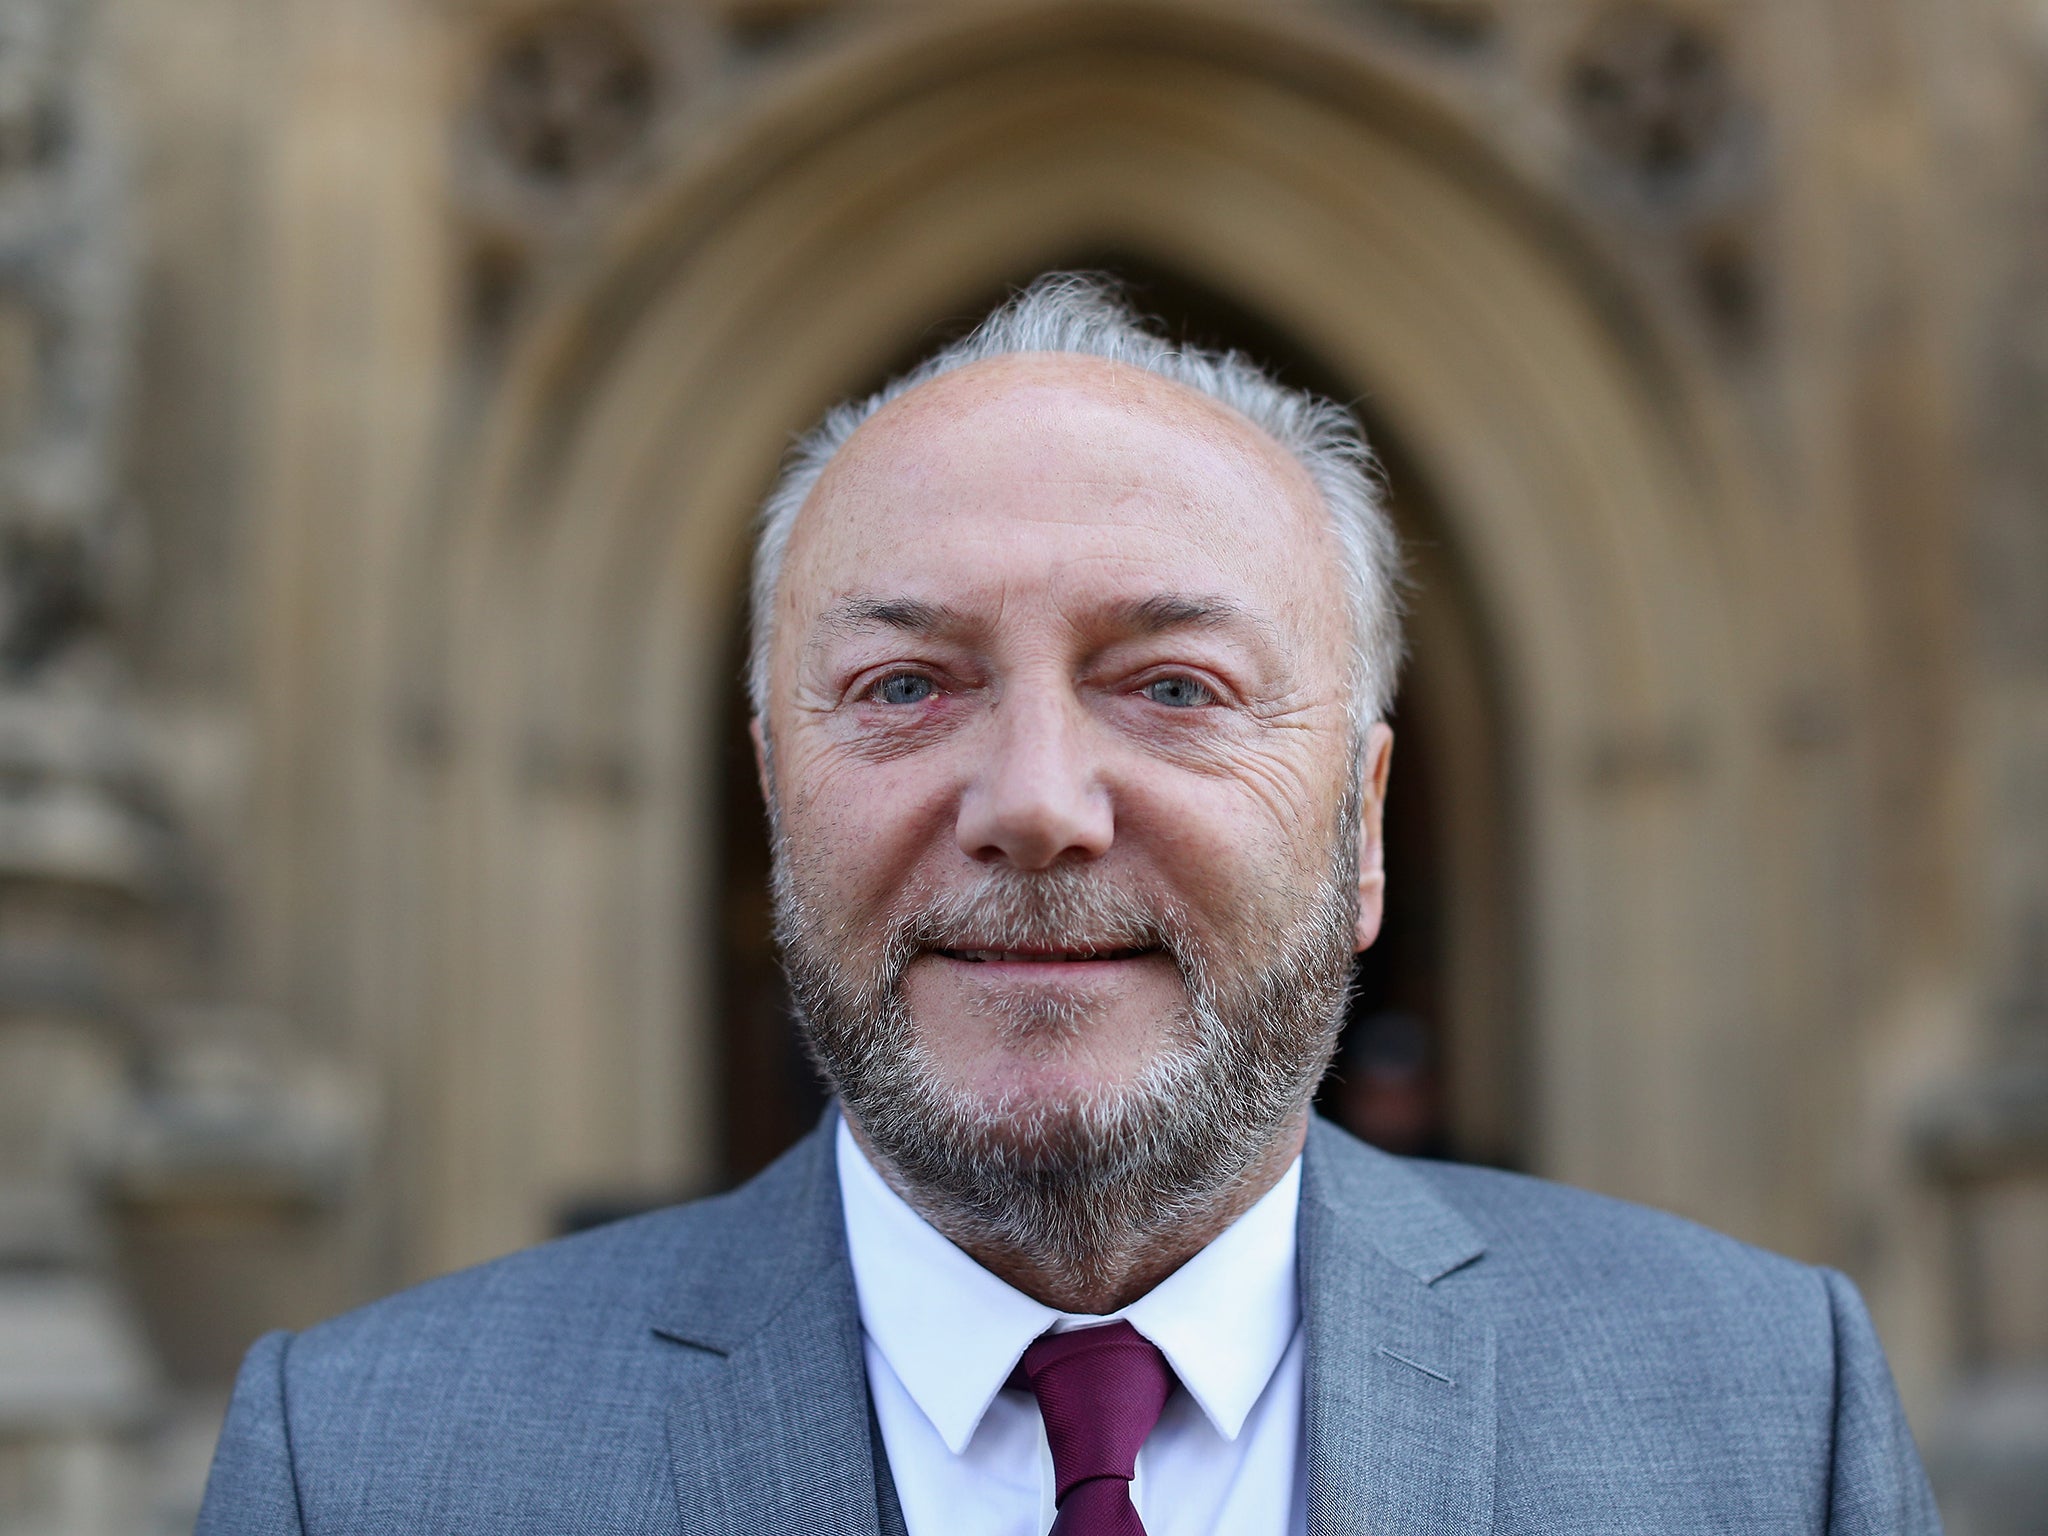 The battle for Bradford West descended to a new low after Respect candidate George Galloway